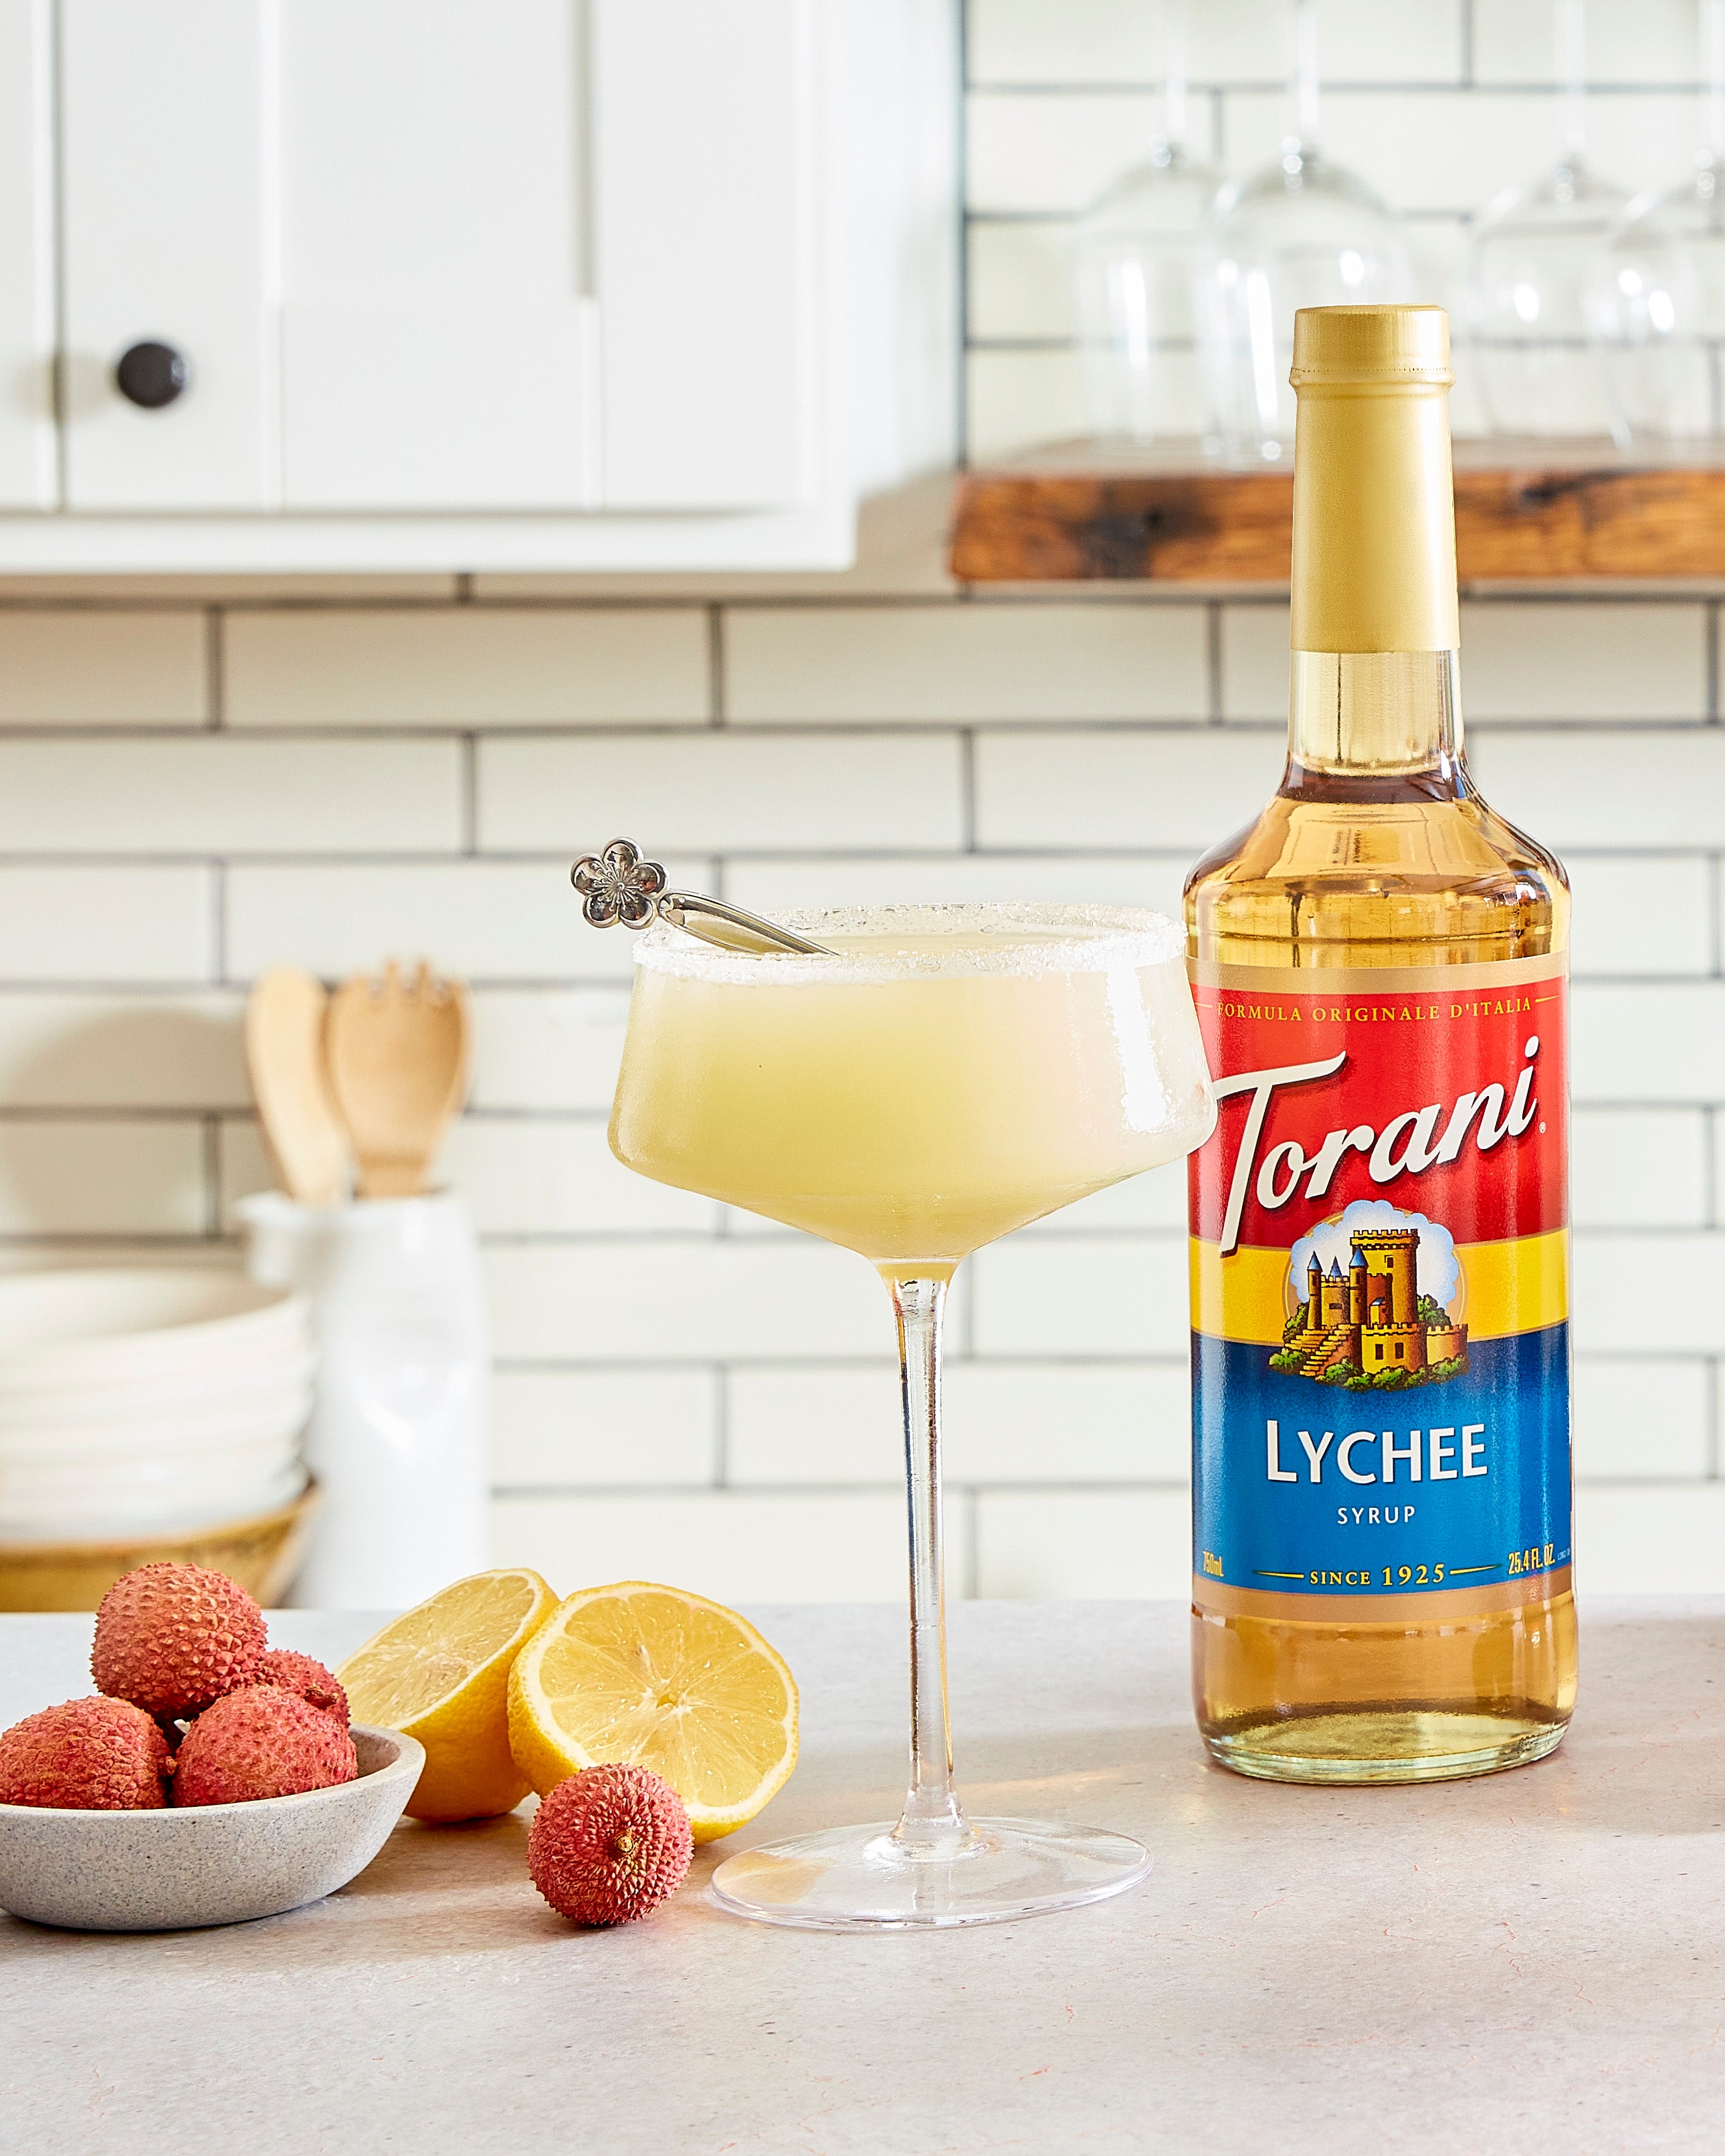 Torani Classic Flavored Syrups - 750 ml Glass Bottle: Lychee